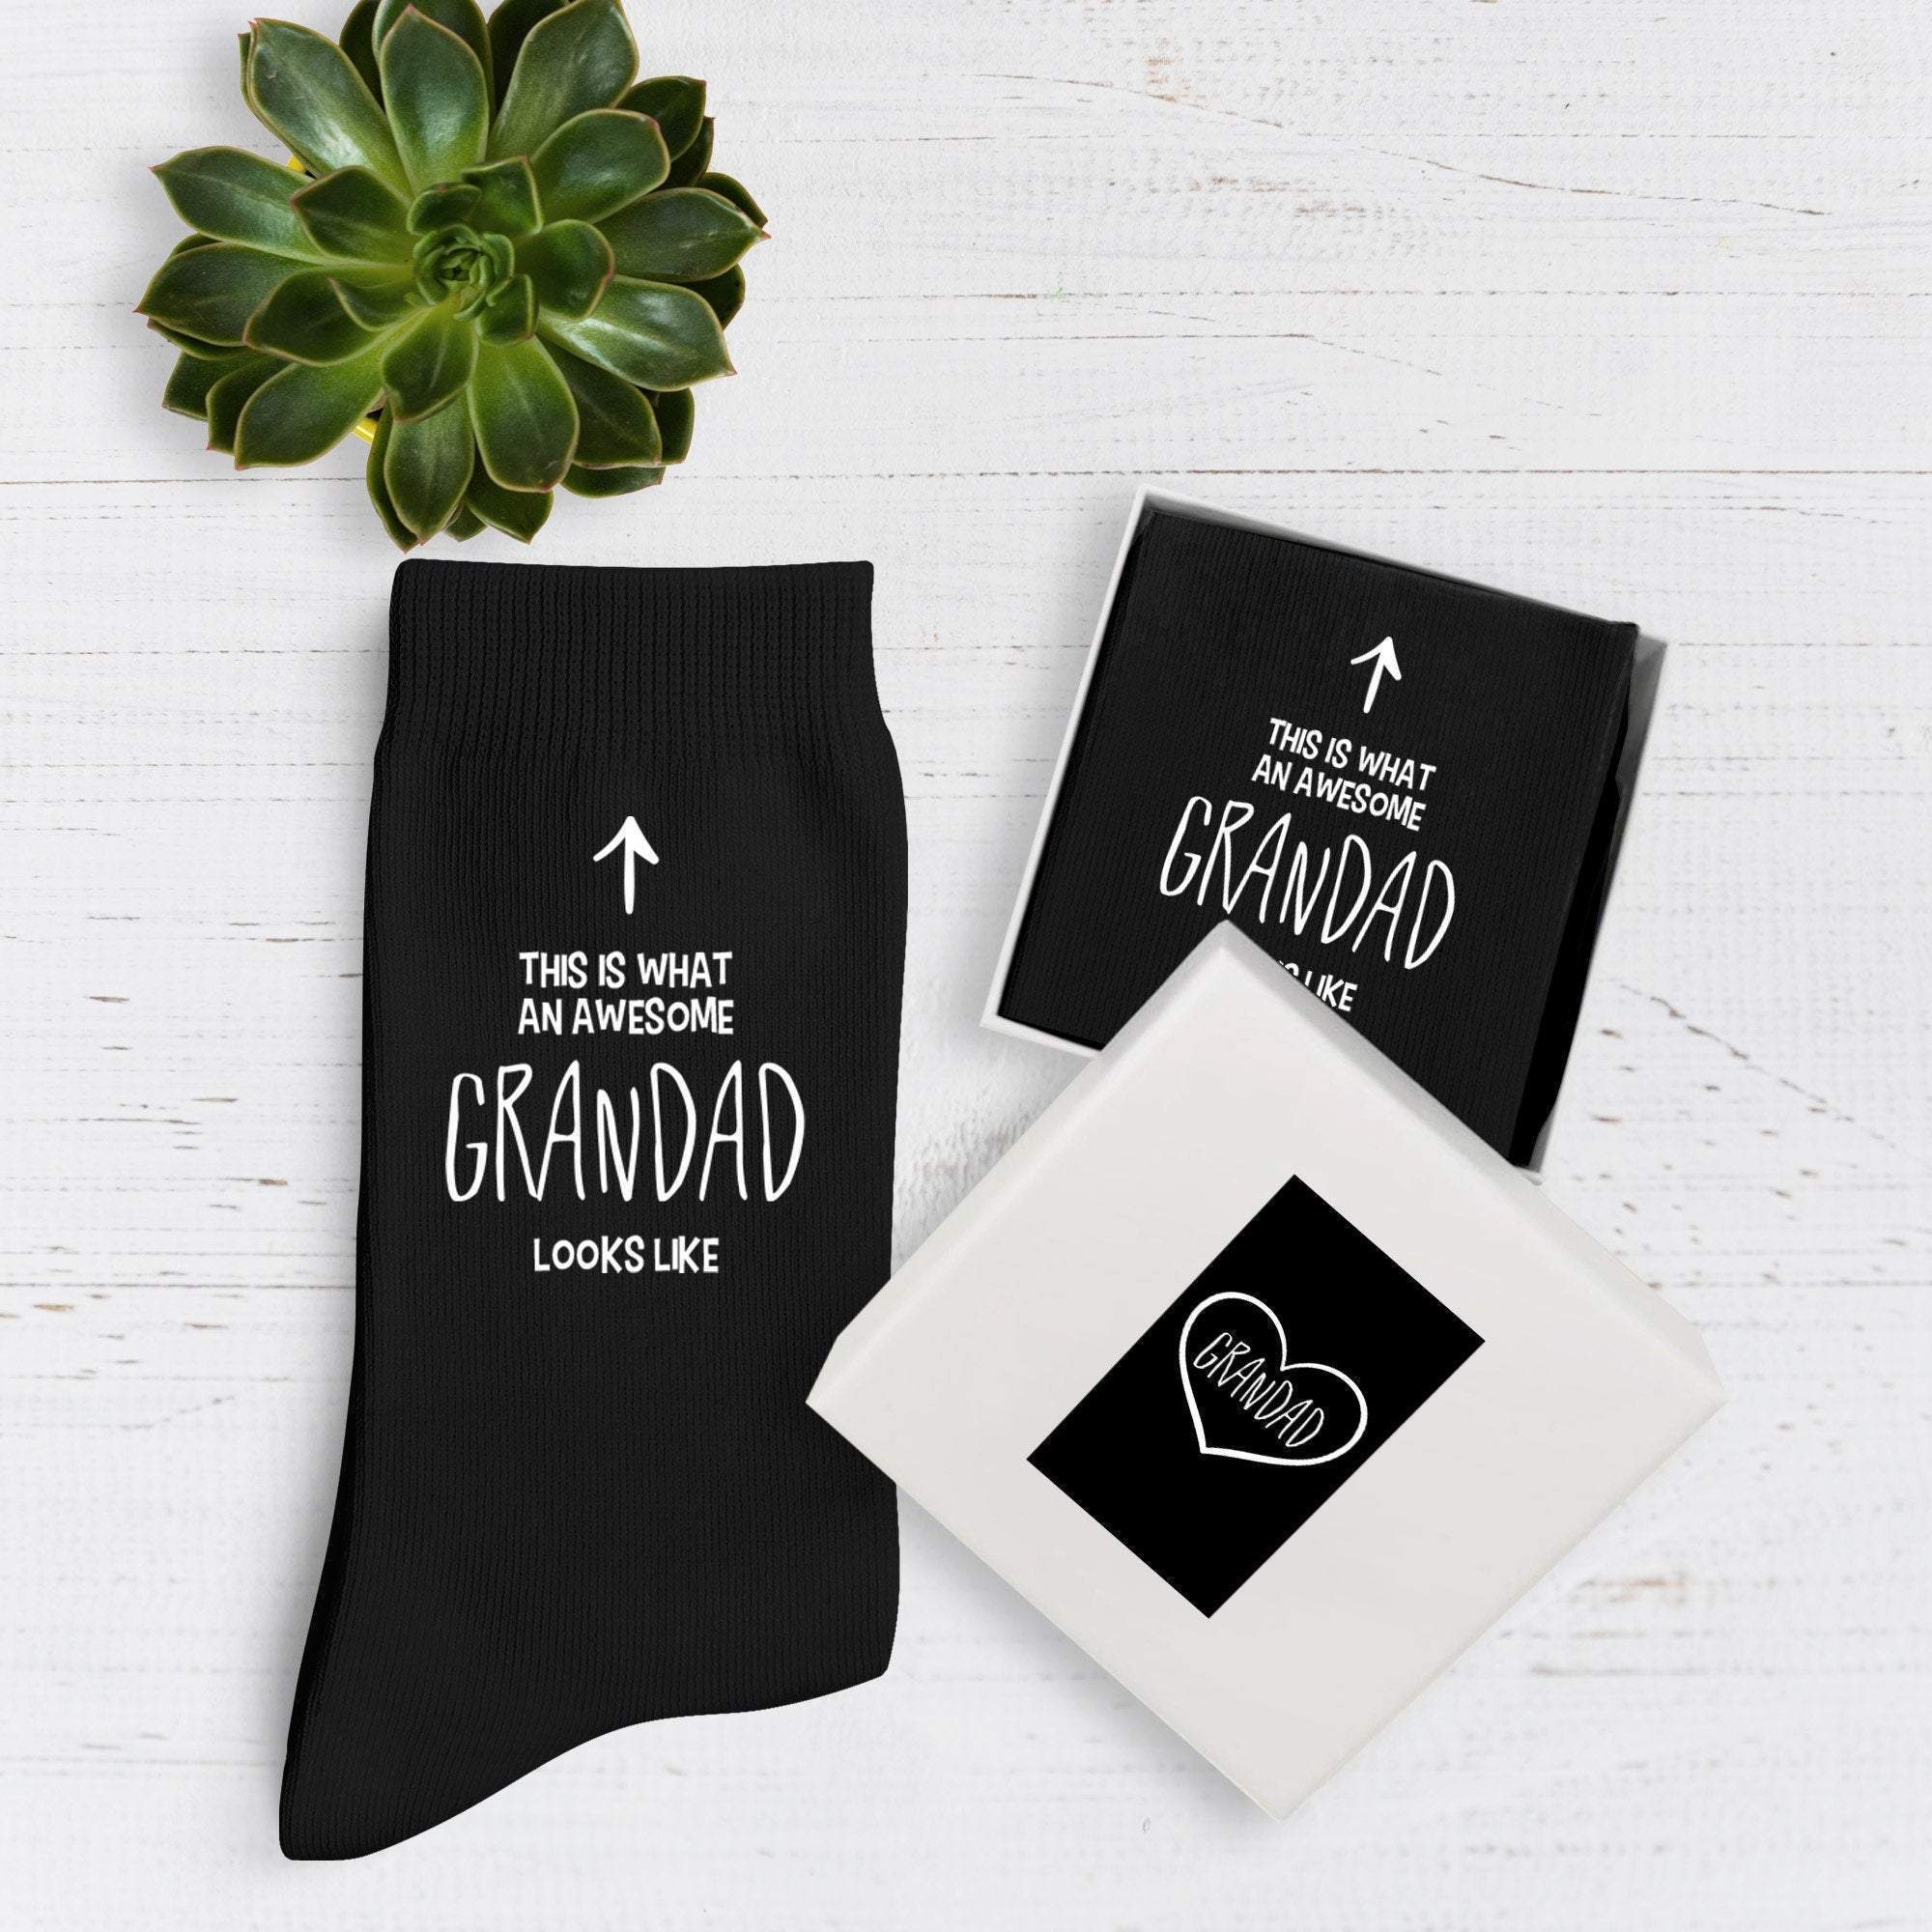 This is what an awesome grandad looks like cotton socks, birthday gift for grandpa, Christmas gift